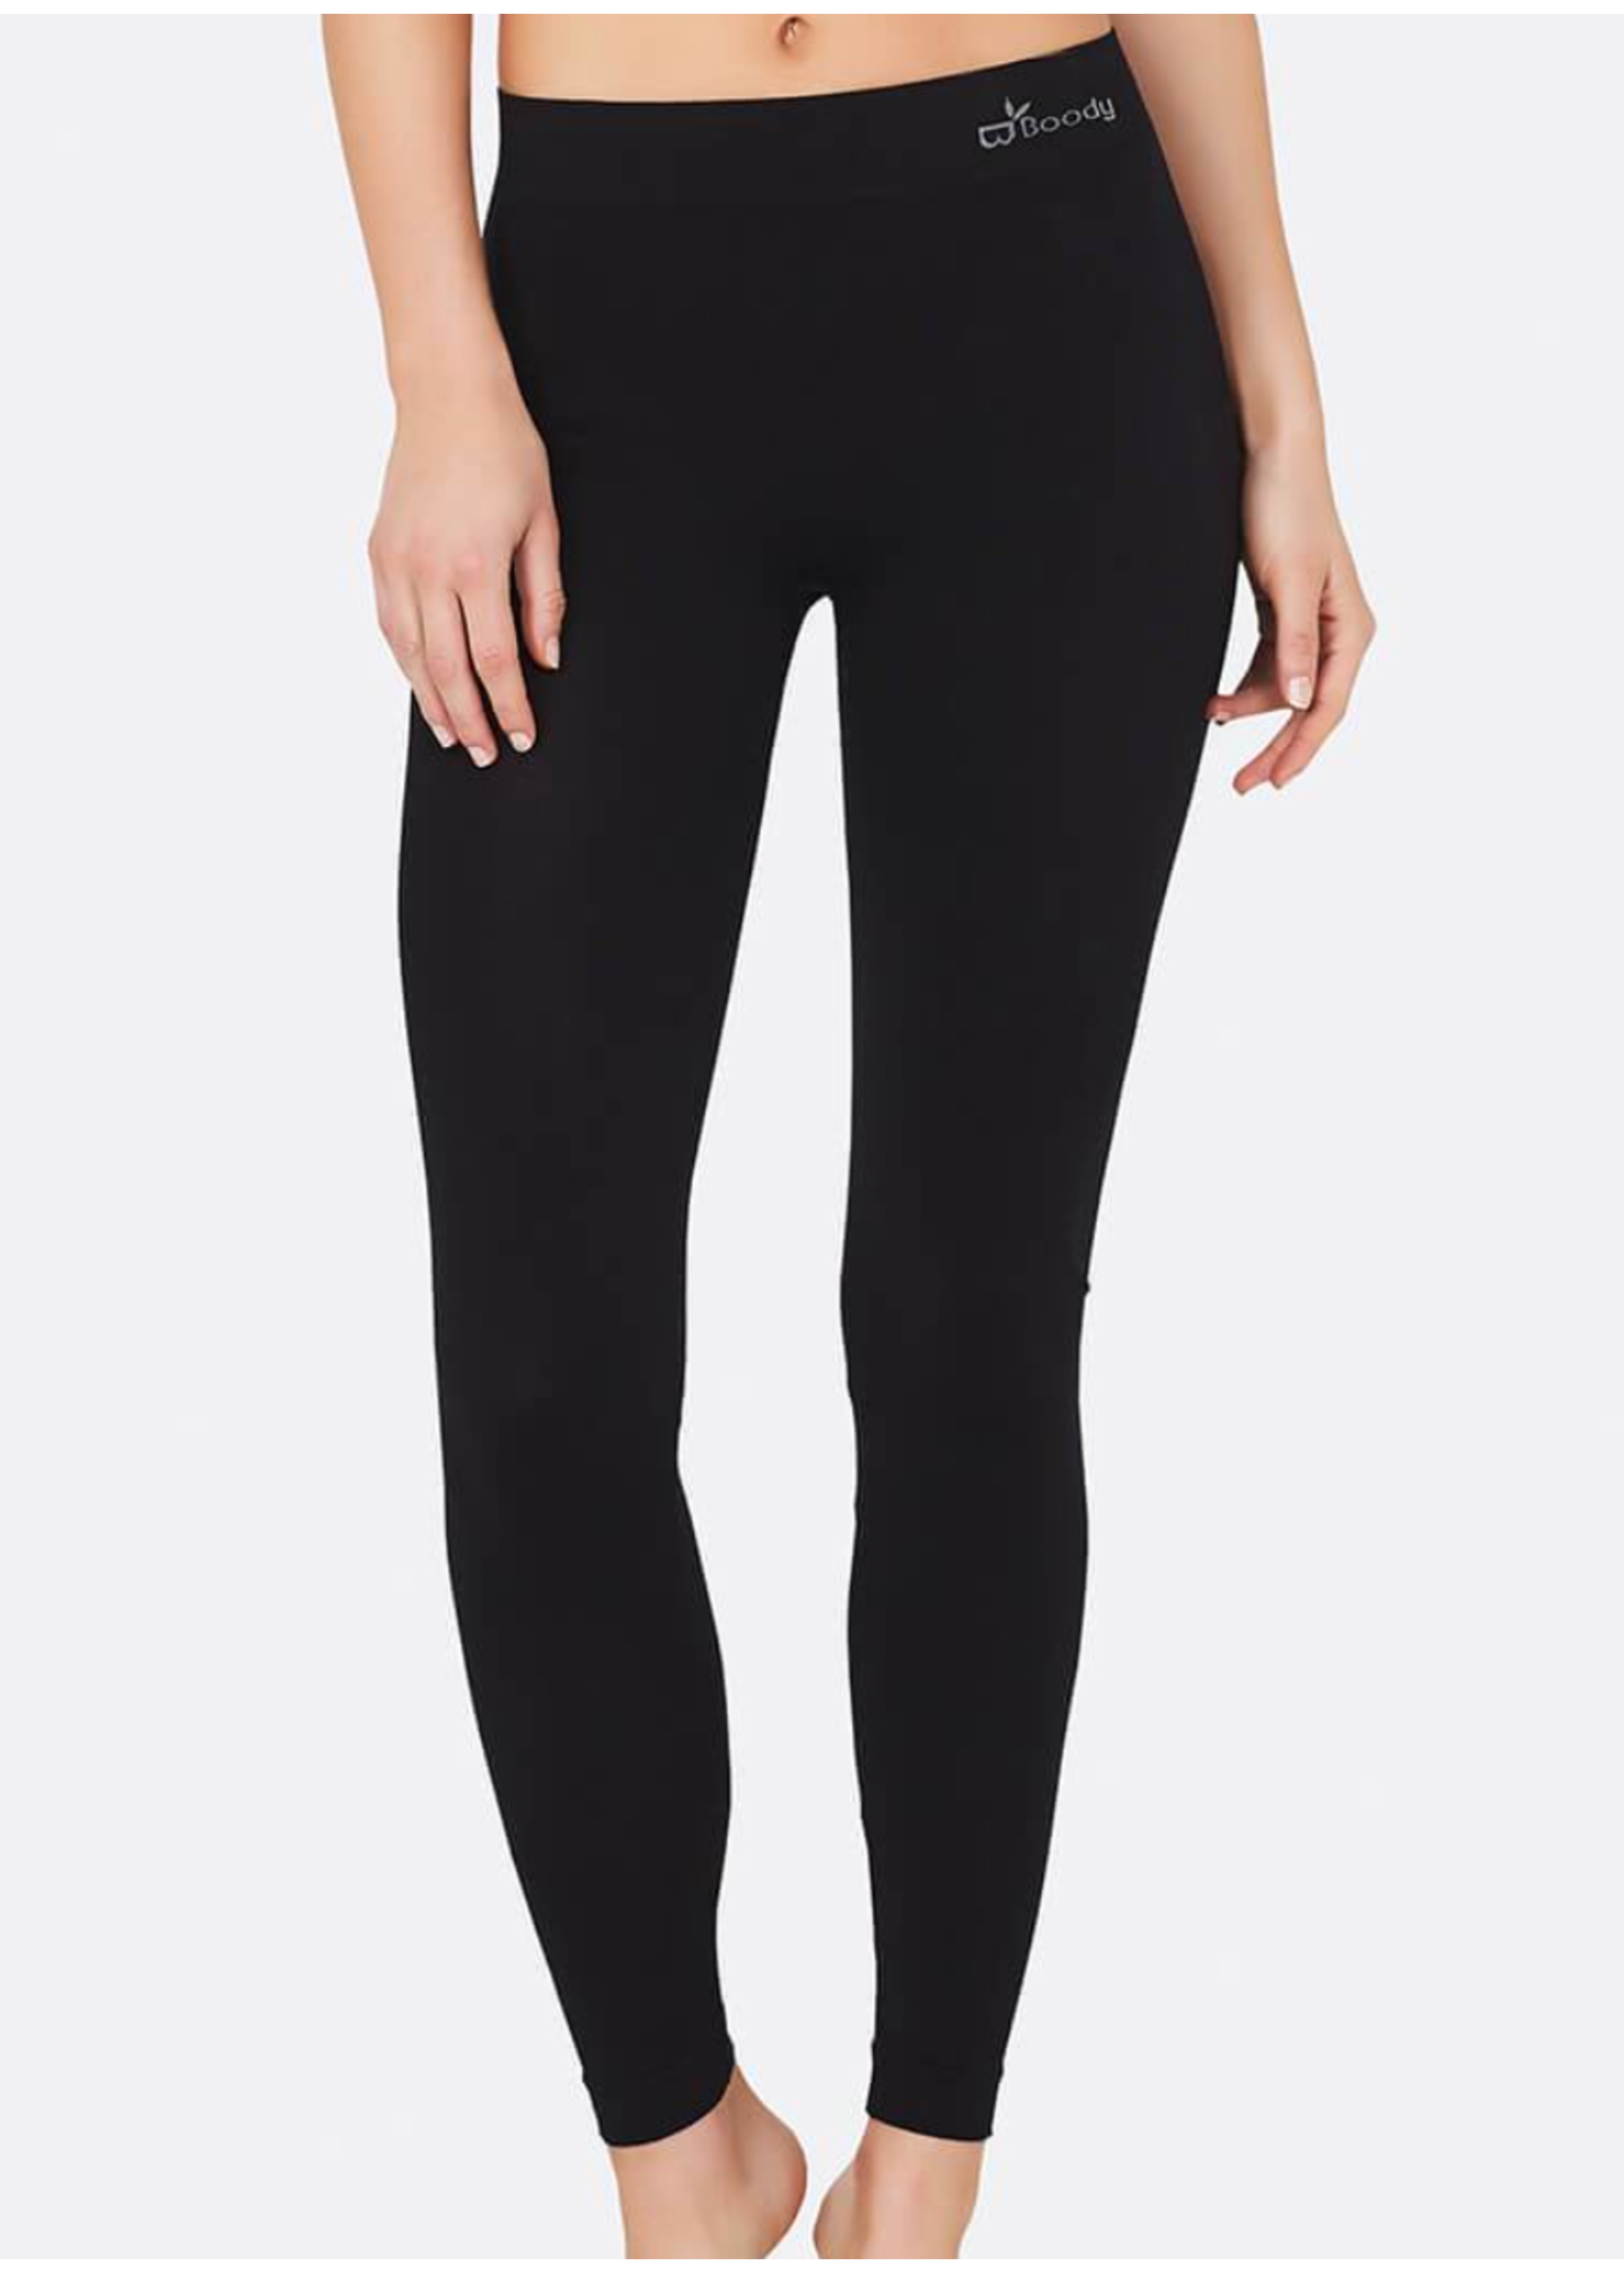 Boody wear Full length black Active leggings for Sale in San Diego